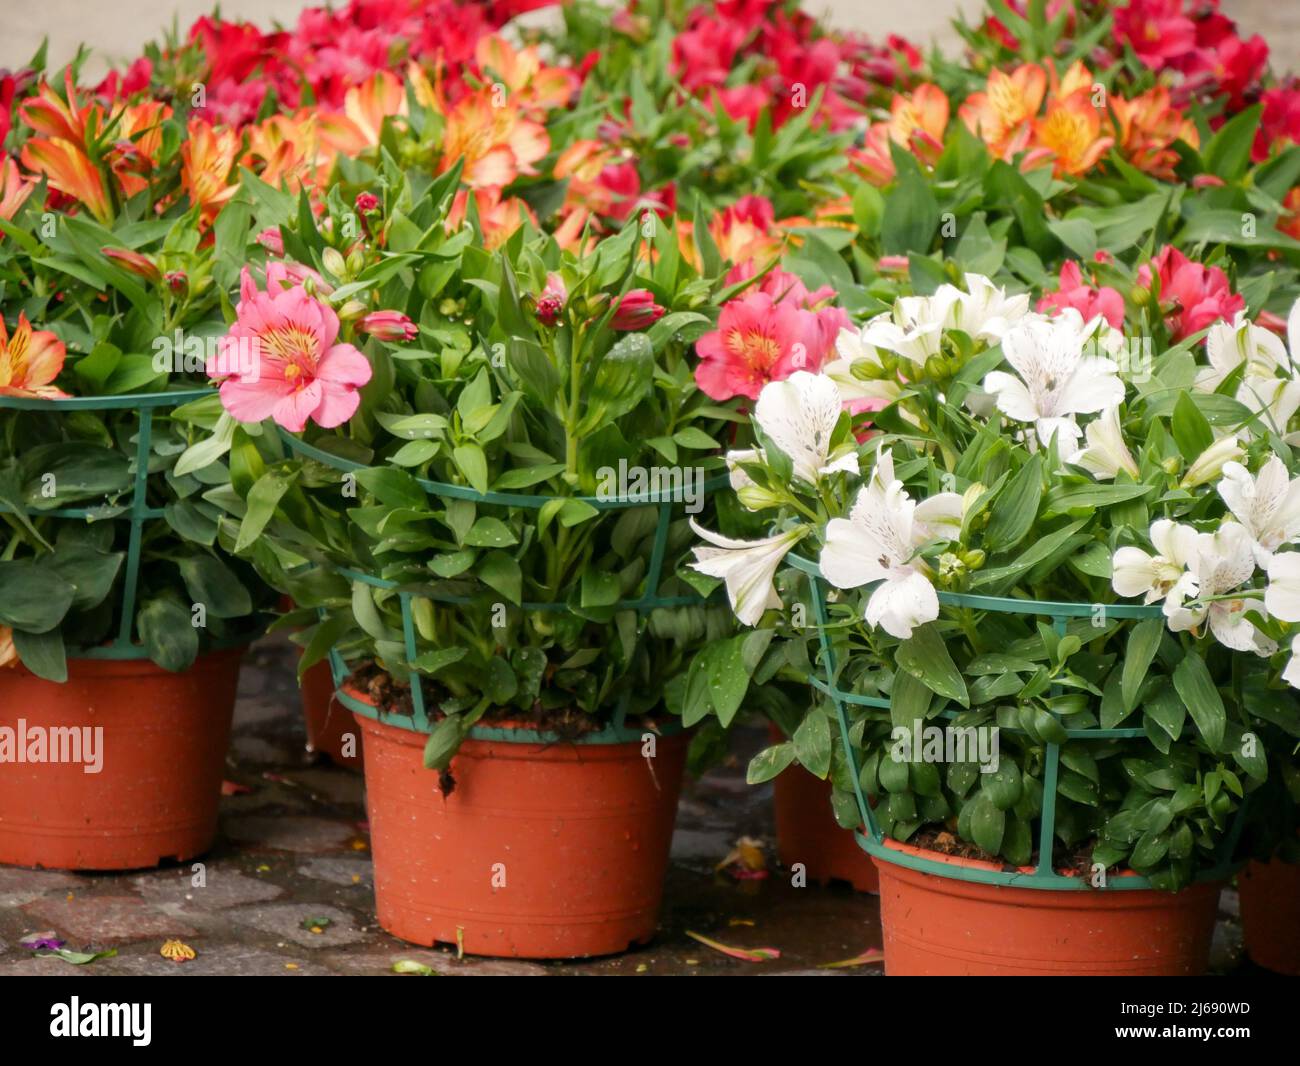 producers selling plants and flowers in the street in a spring city event Stock Photo